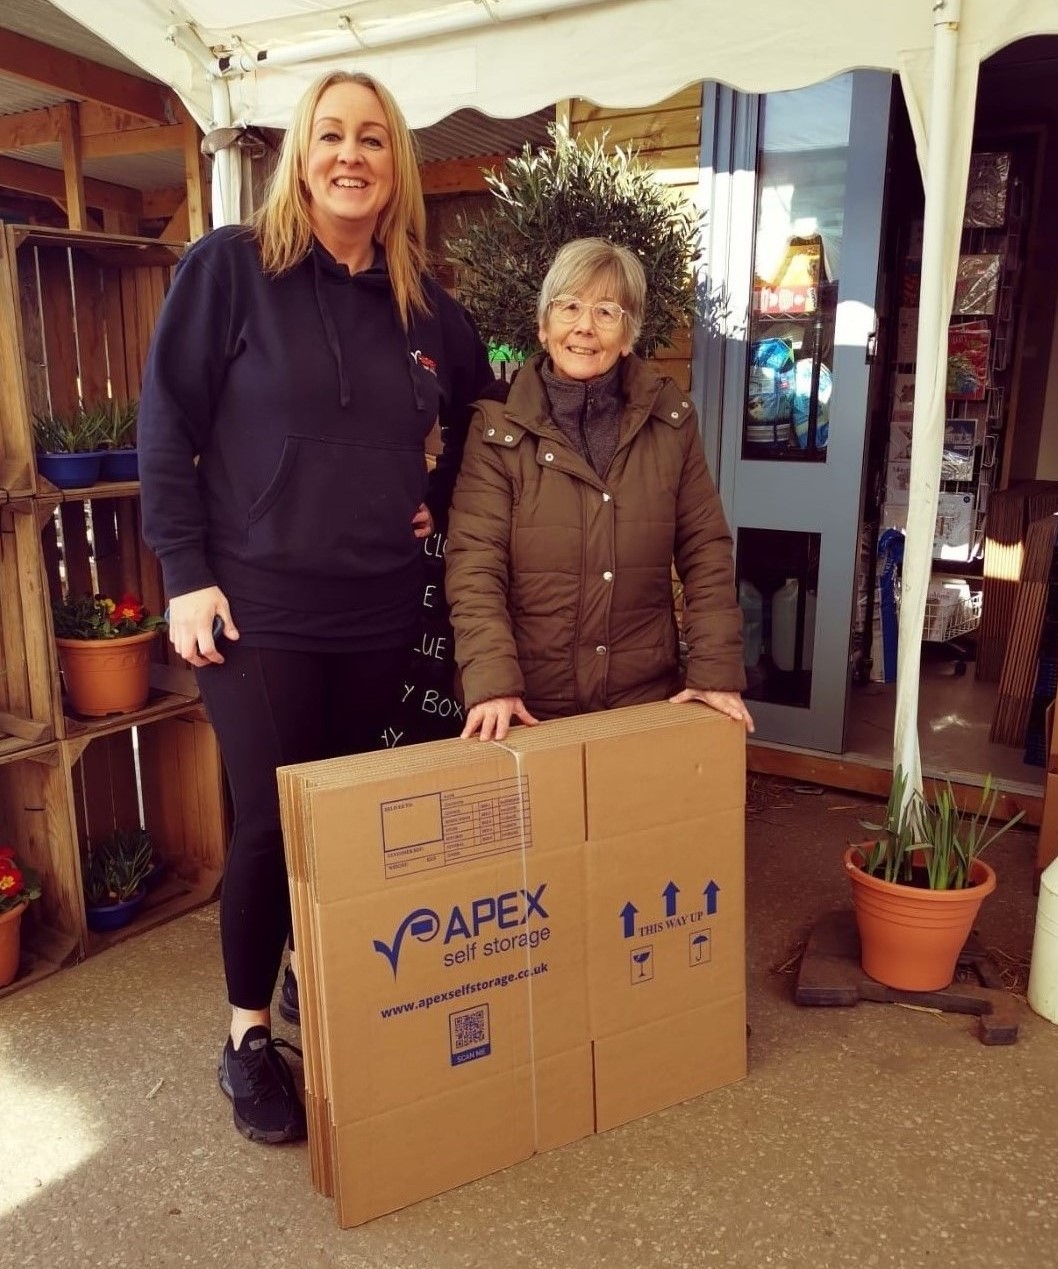 Apex team member smiling with volunteer from Biddulph Rotary Club, holding a stack of Apex Self Storage boxes